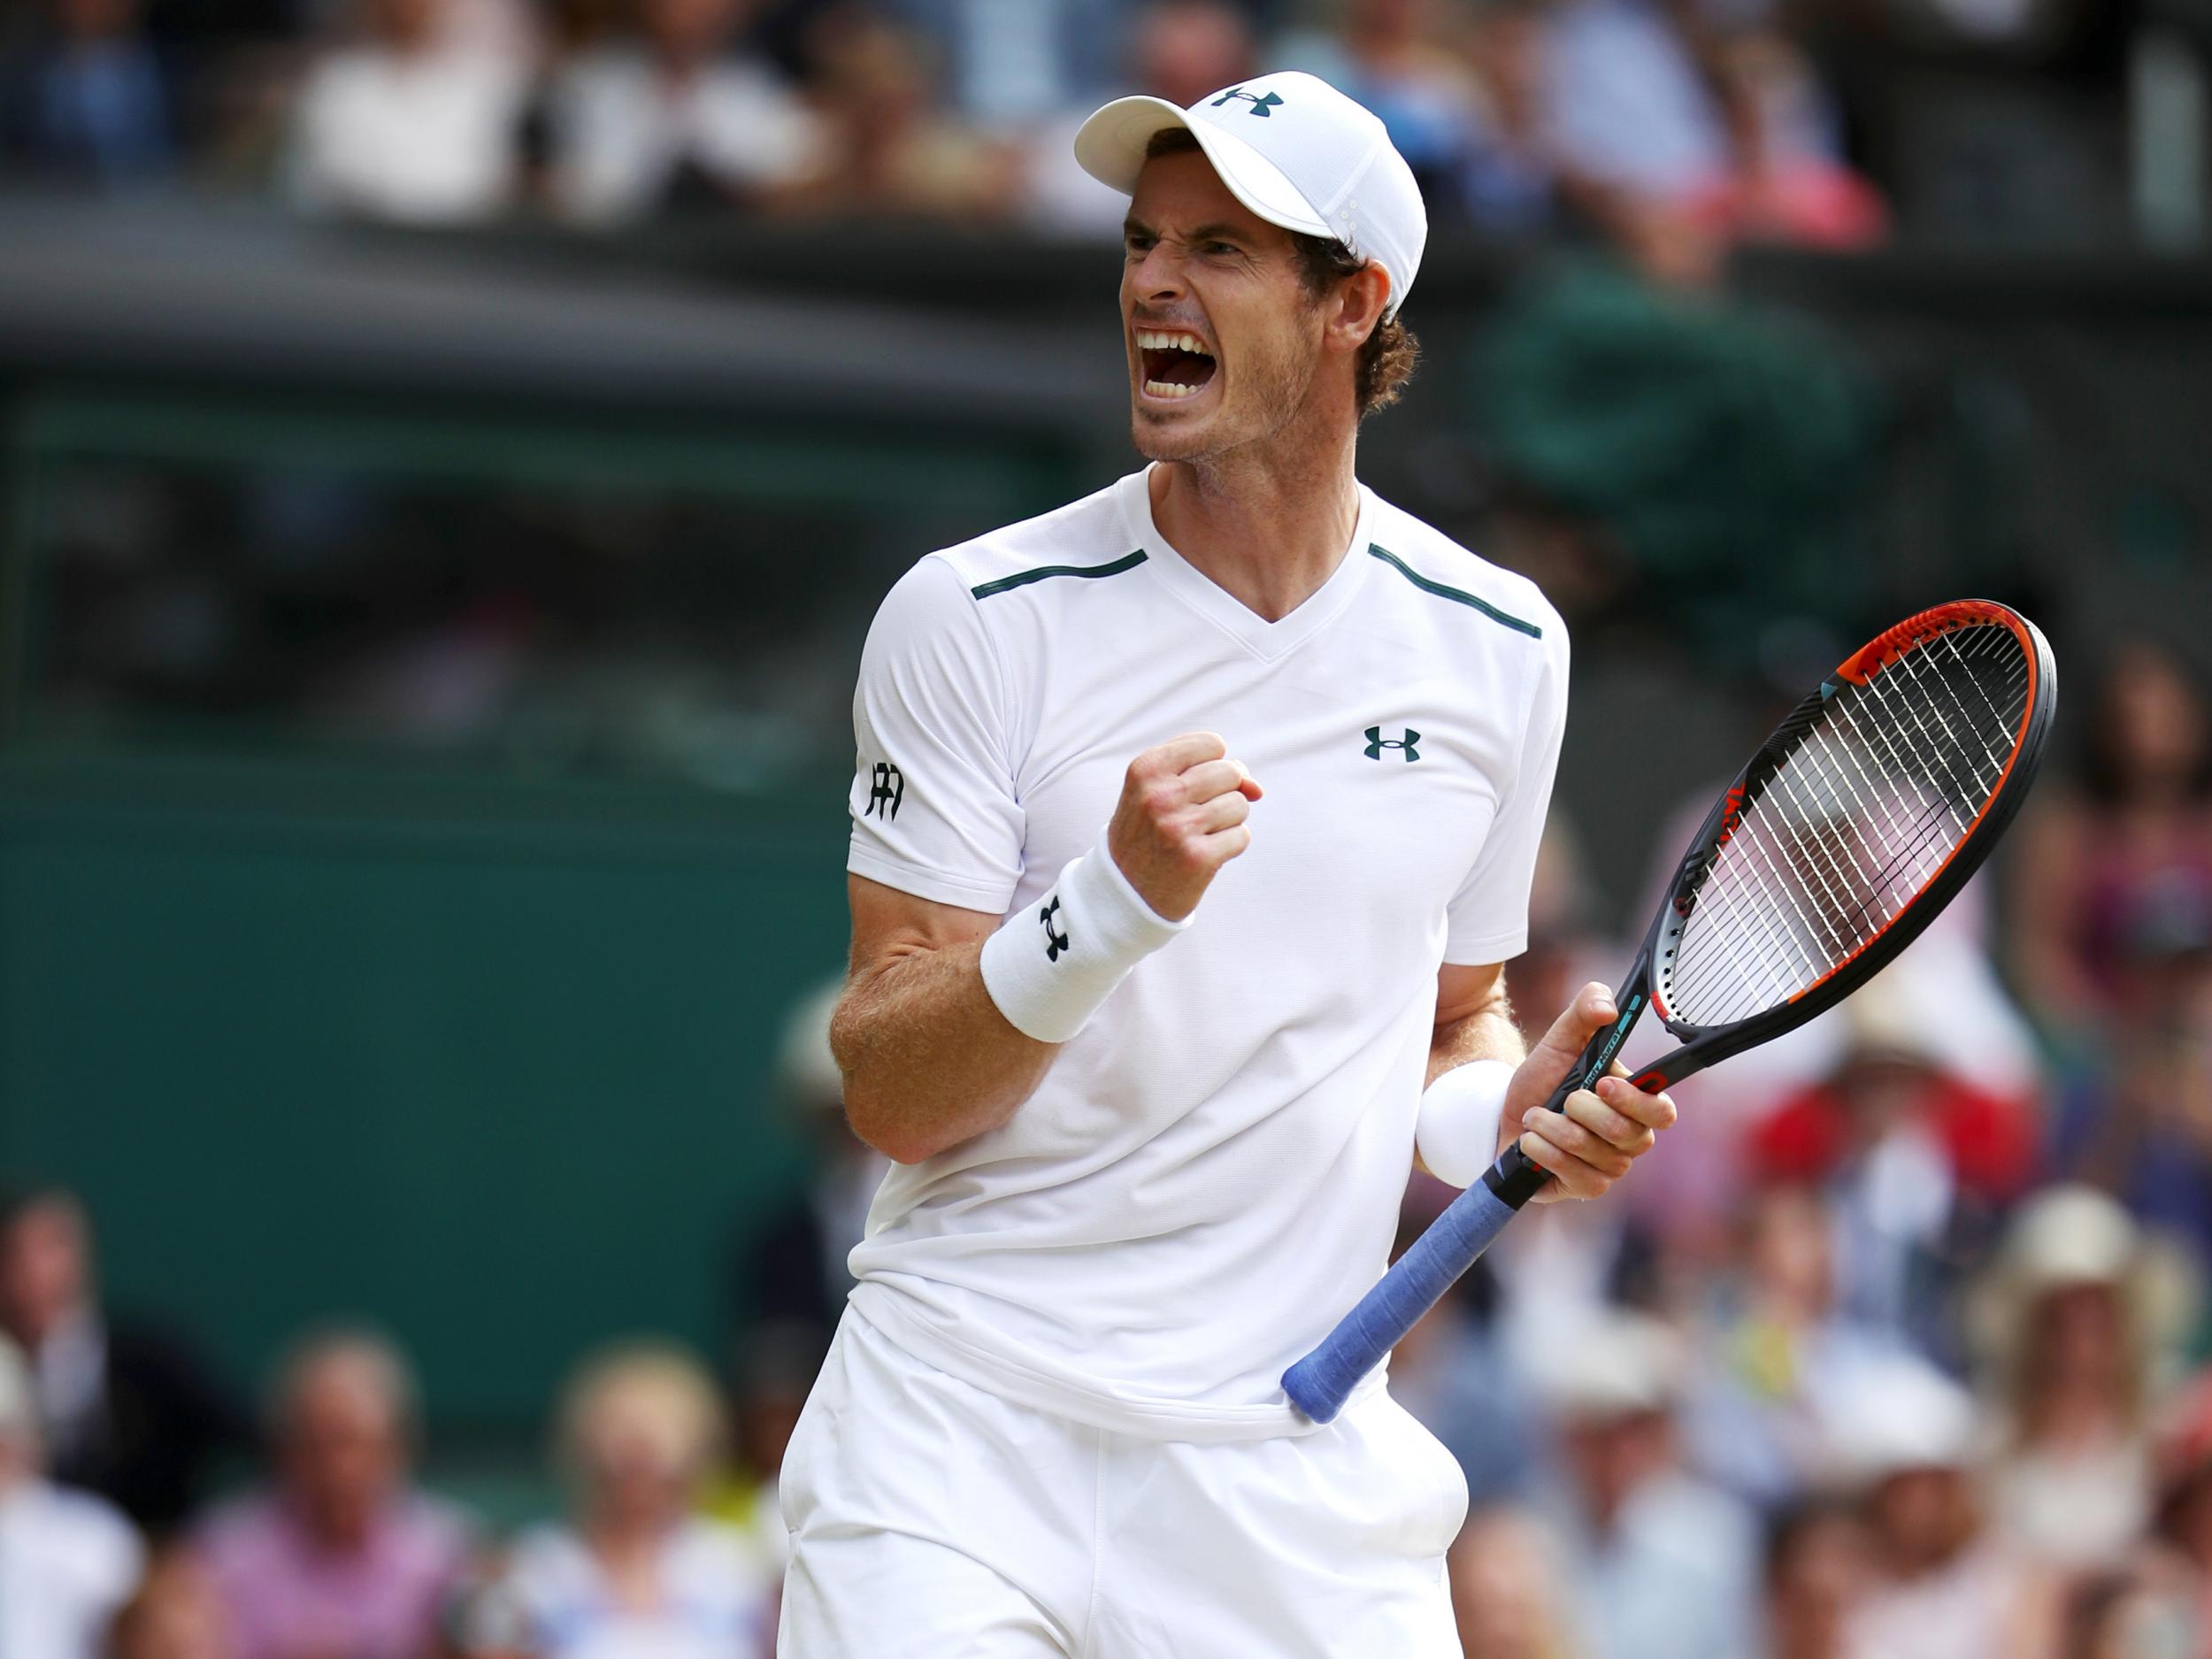 Murray marches on to the quarter-finals for the 10th consecutive time